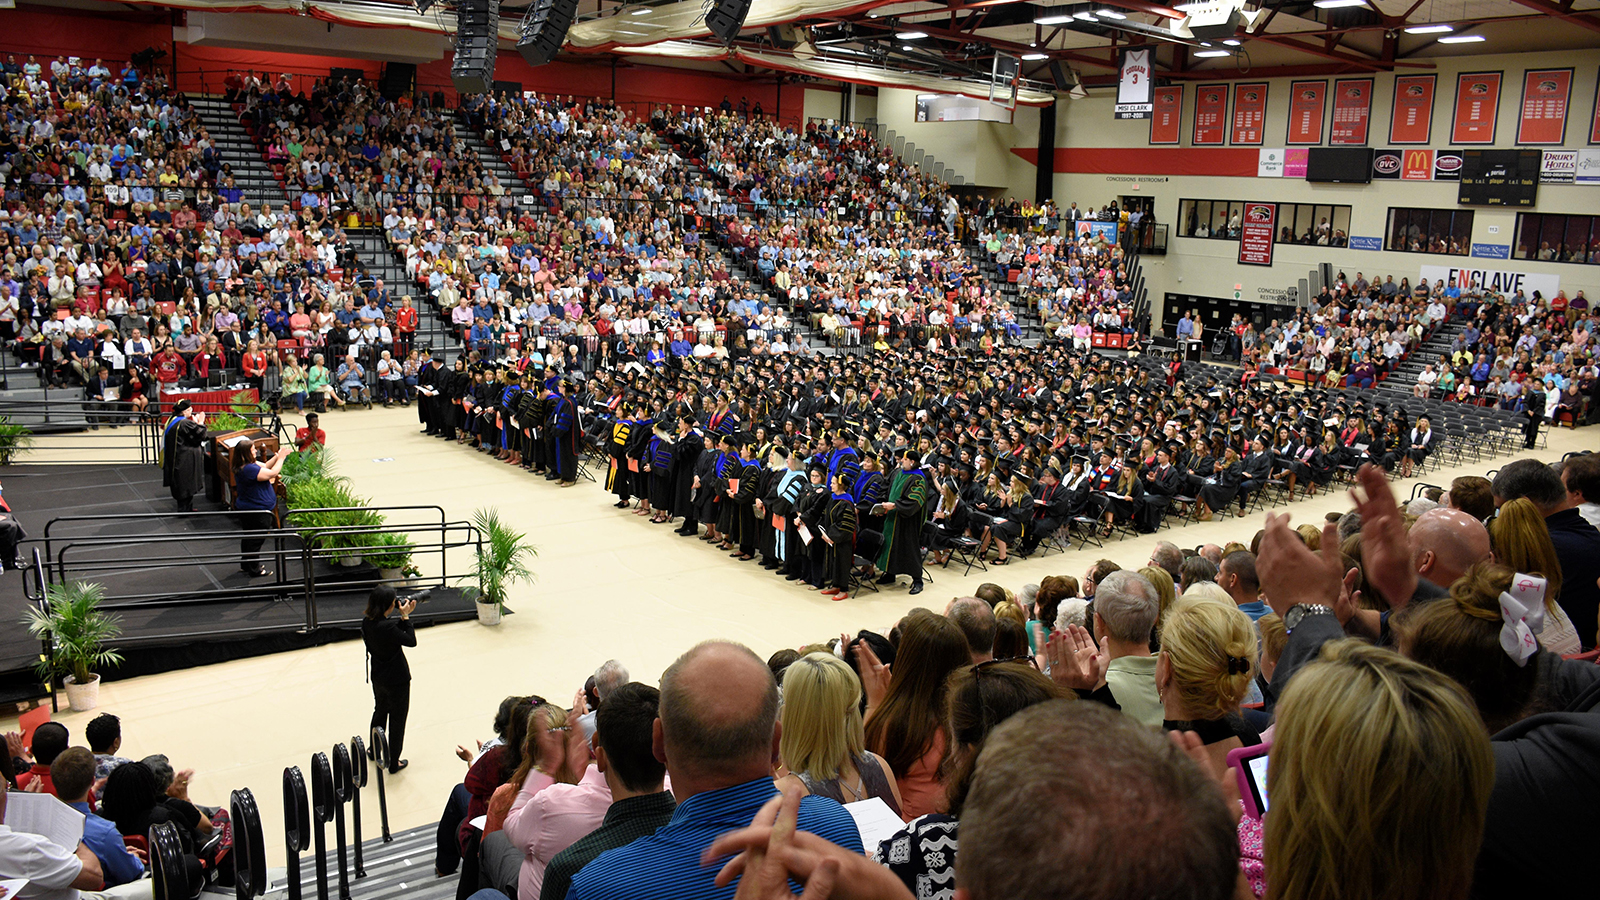 Full gym at previous commencement